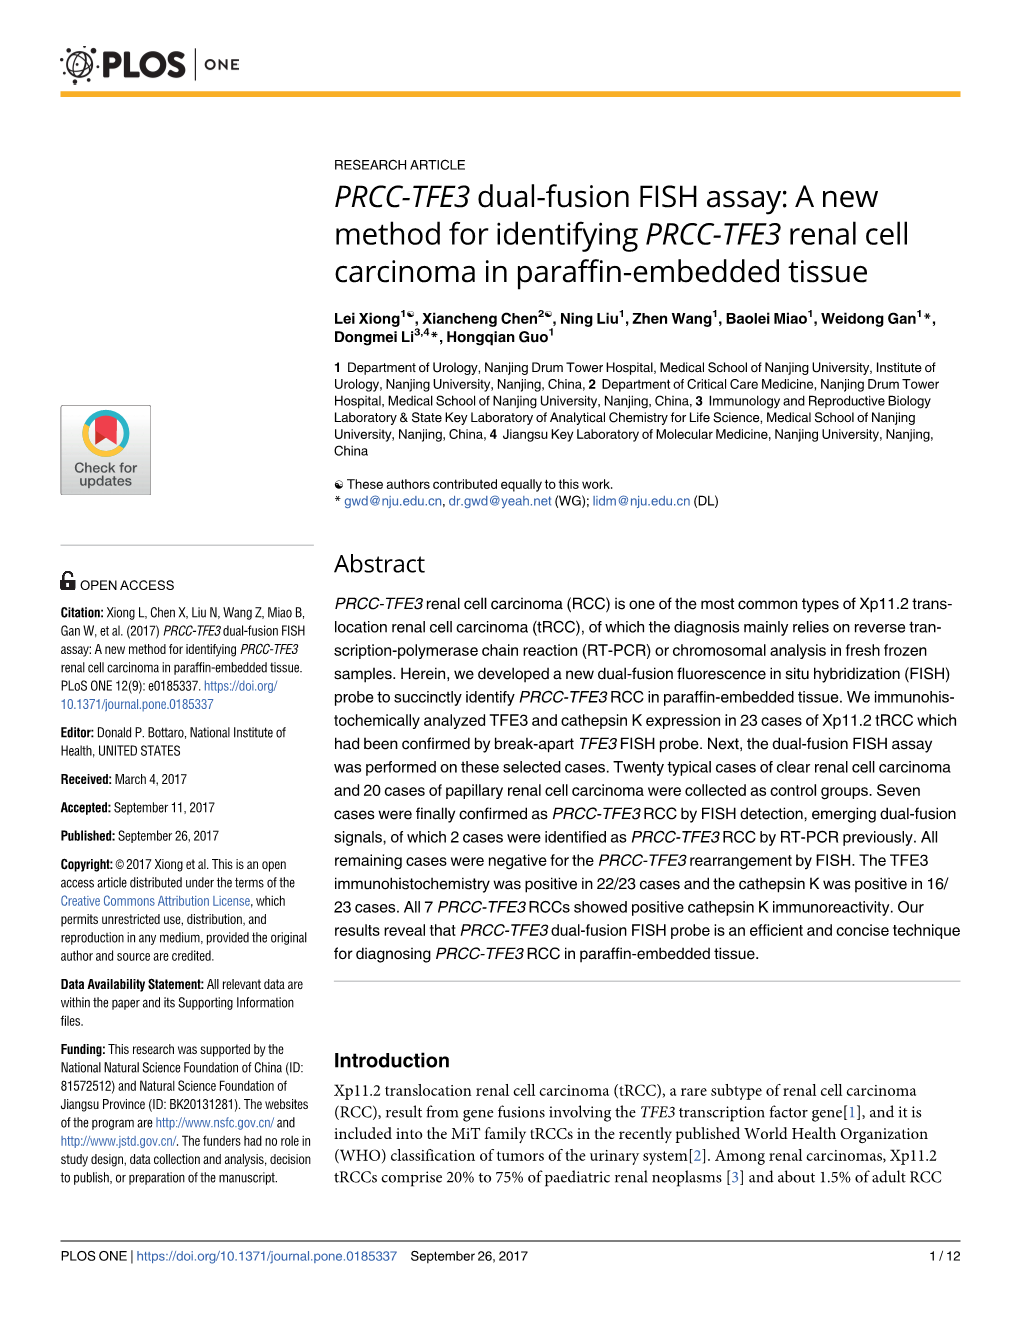 PRCC-TFE3 Dual-Fusion FISH Assay: a New Method for Identifying PRCC-TFE3 Renal Cell Carcinoma in Paraffin-Embedded Tissue